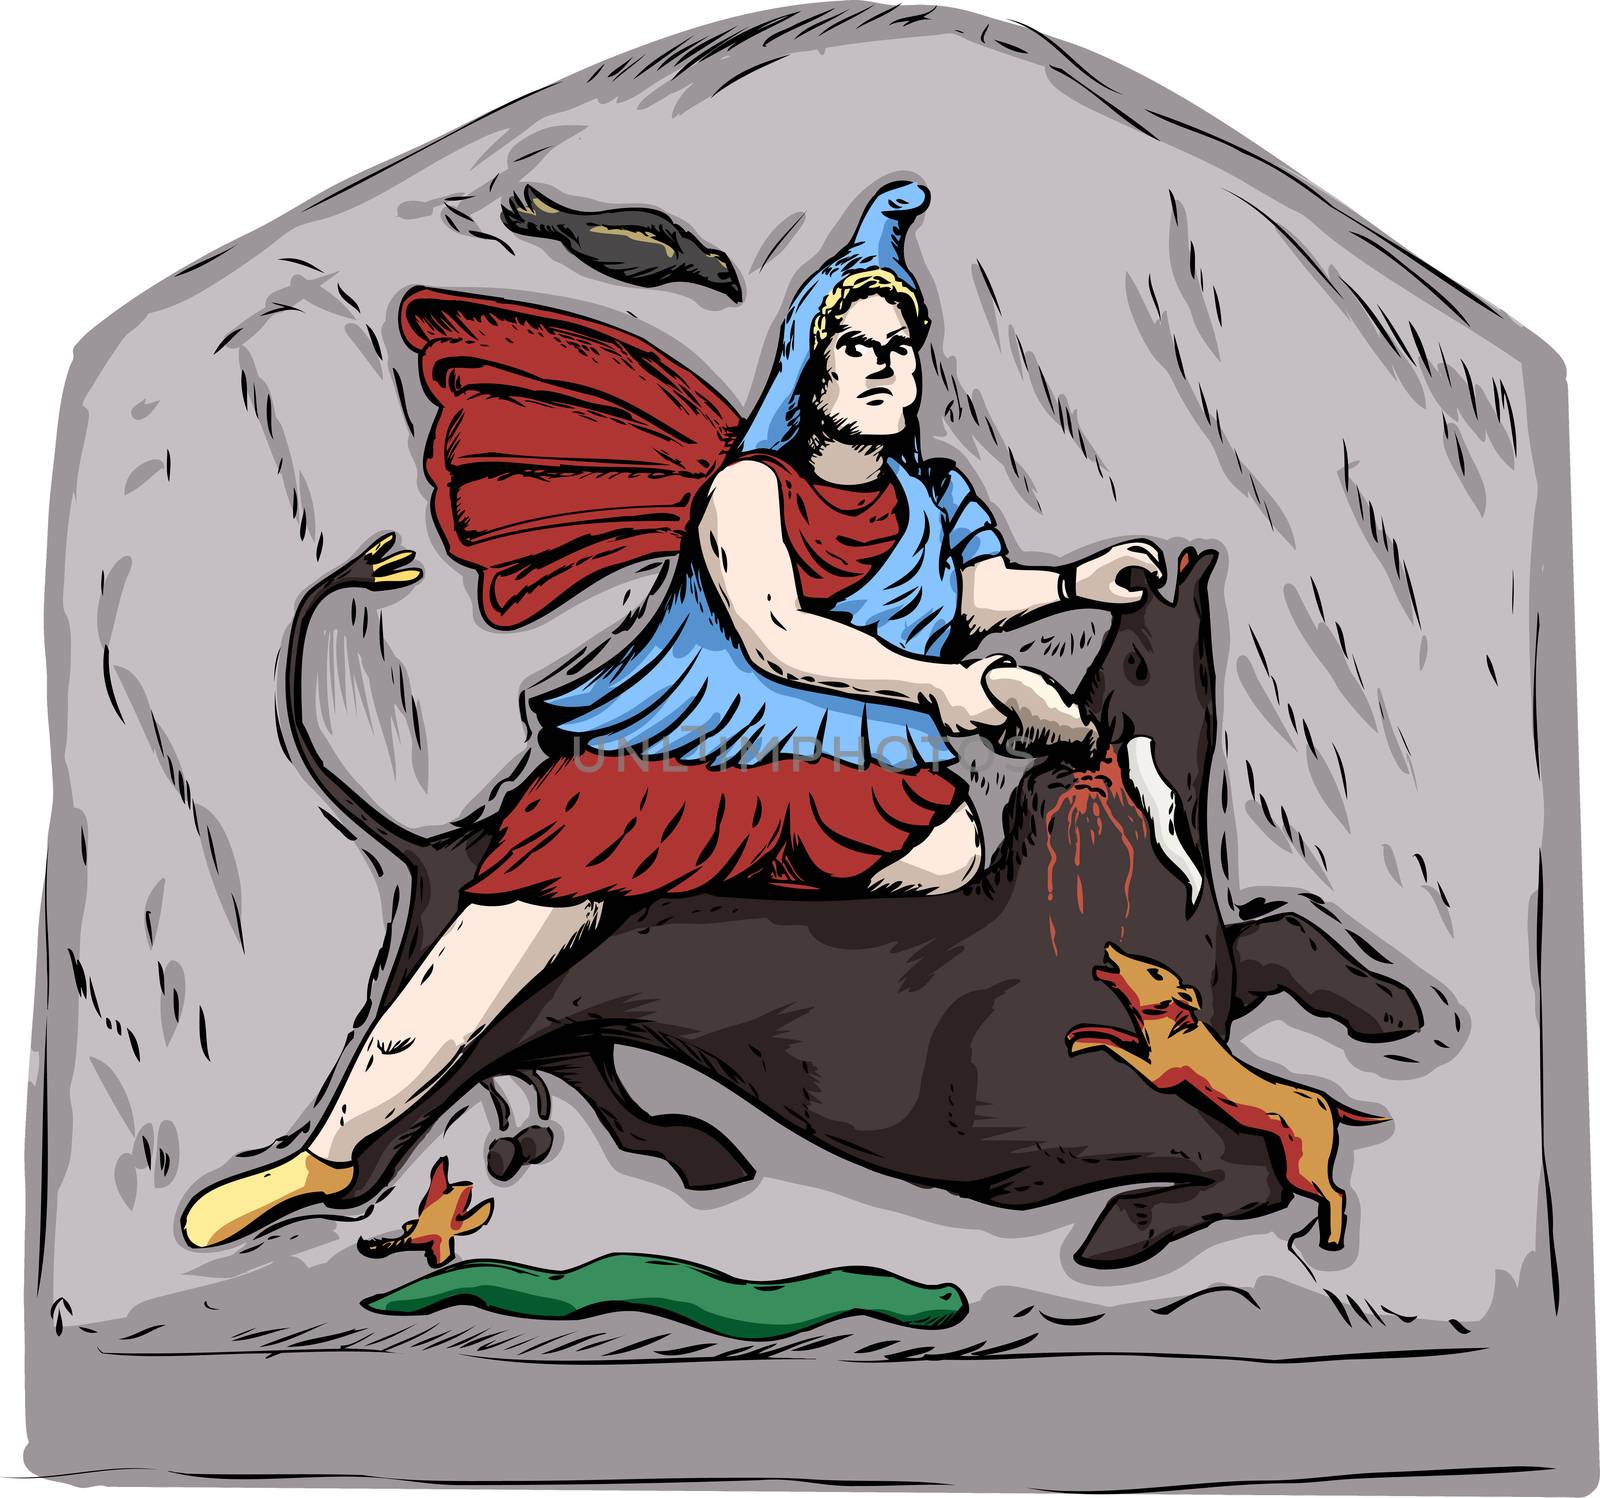 Forensic reconstruction illustration of Mithras slaying of a black bull from 4th century stone carvings in Jajce, Bosnia